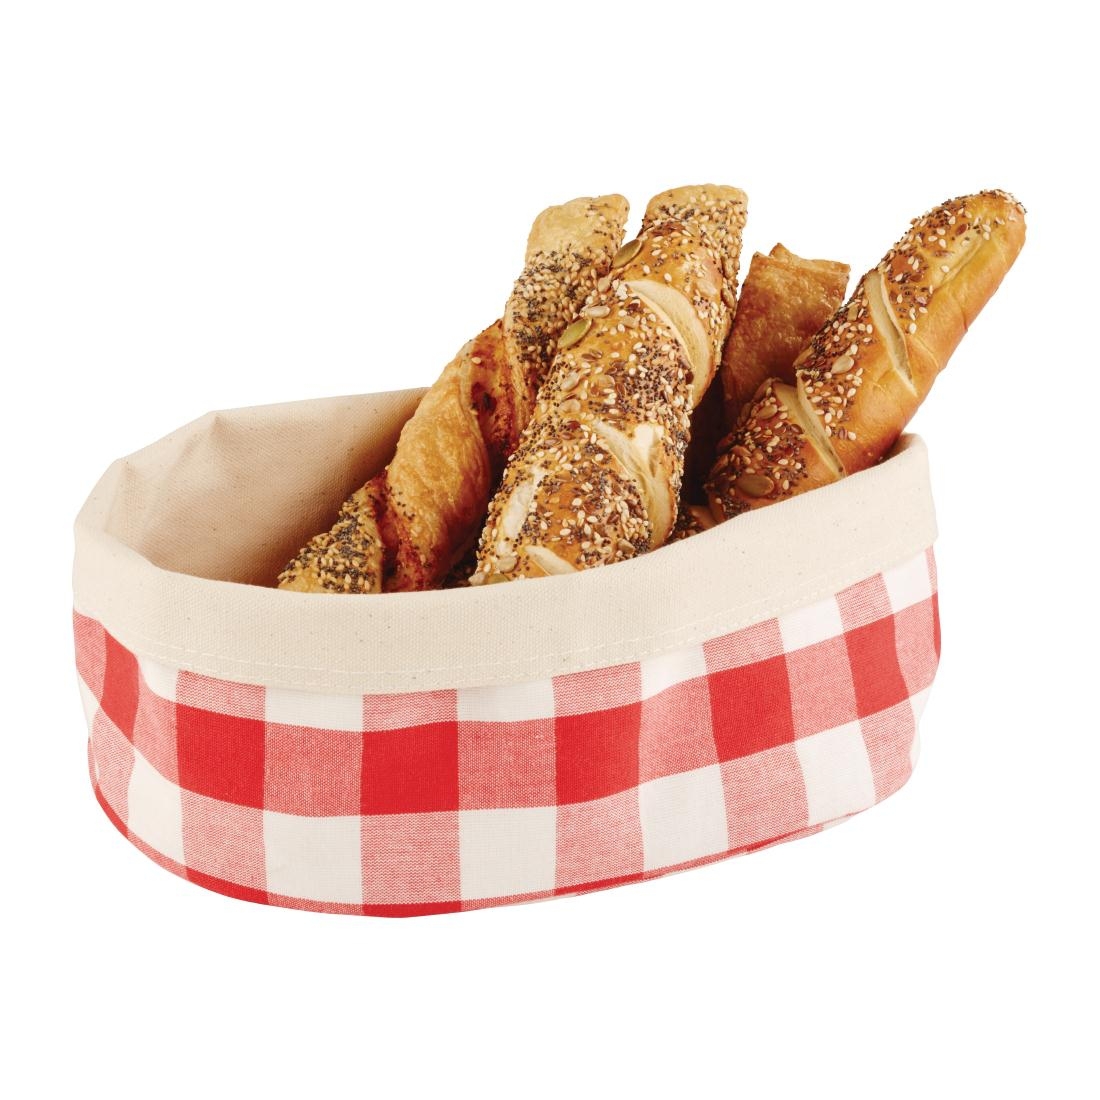 APS Bread Basket Oval Large Red